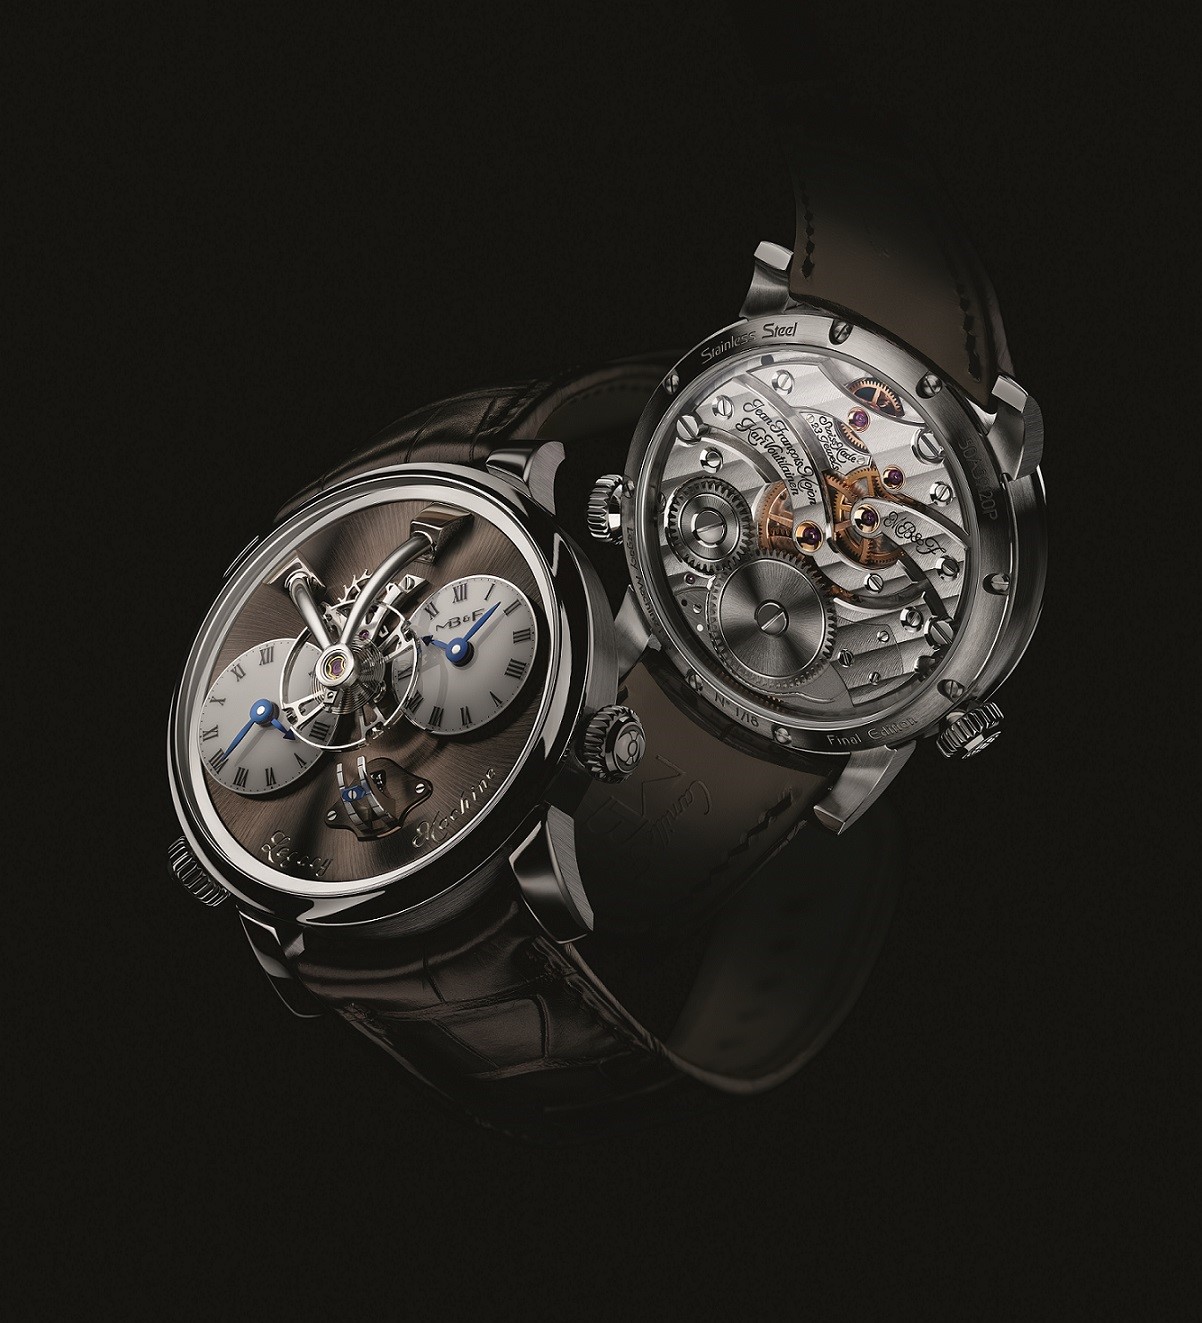 MB&F LM1 the first round watch designed by Max Büsser